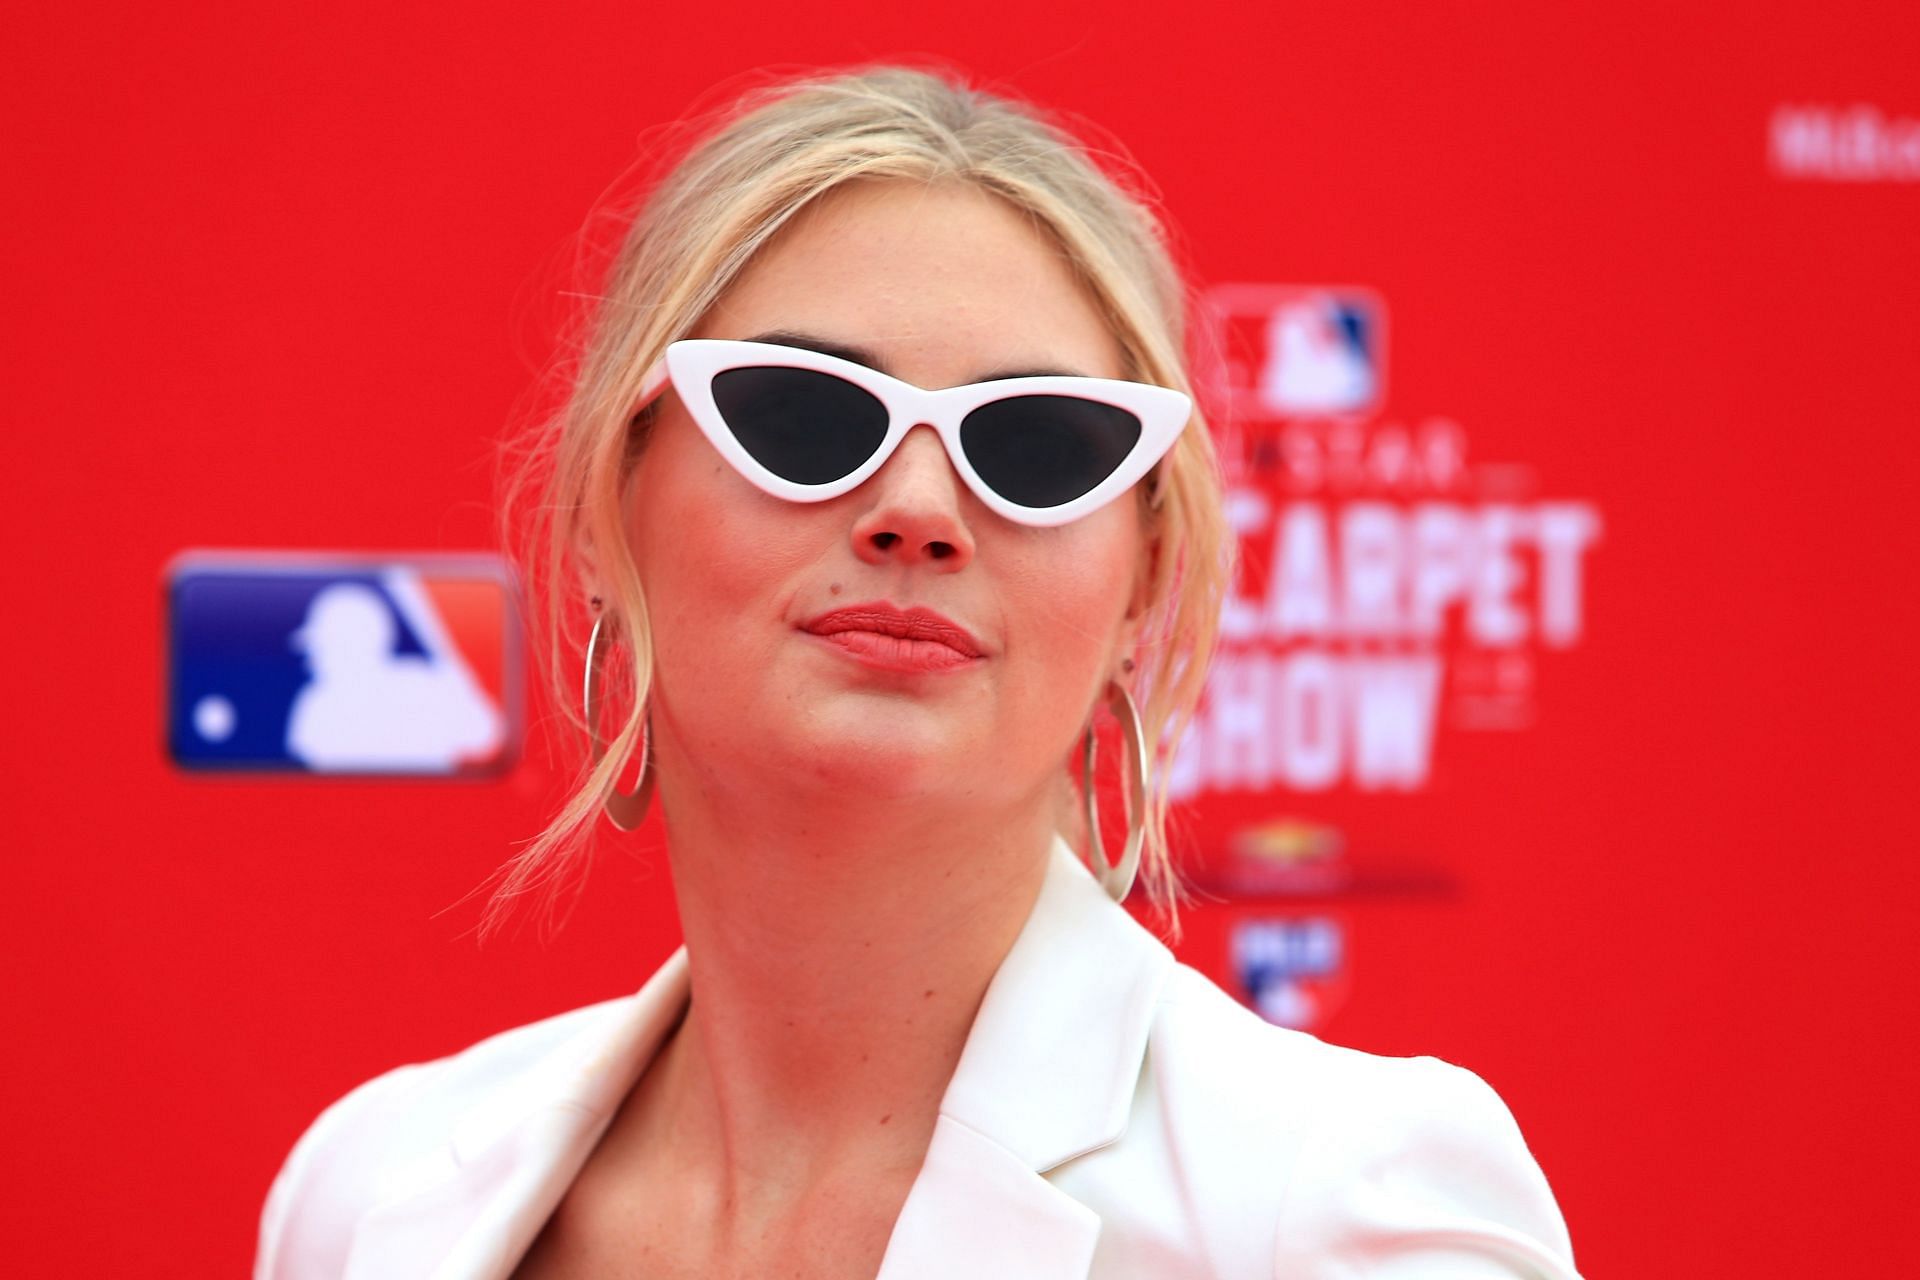 Kate Upton at the 89th MLB All-Star Game, presented by MasterCard - Red Carpet